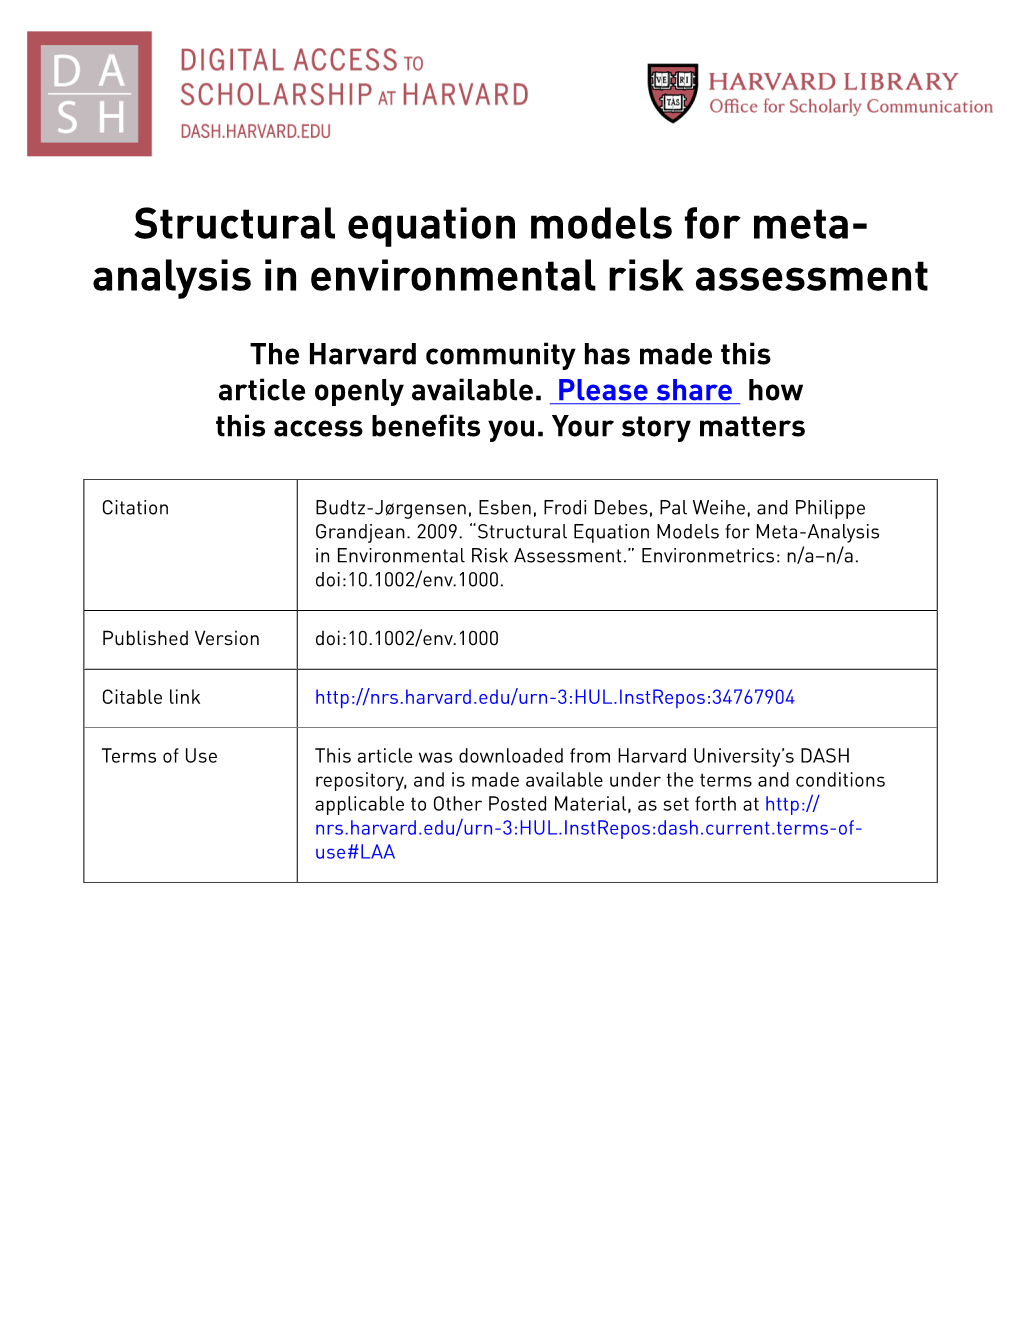 Structural Equation Models for Meta- Analysis in Environmental Risk Assessment